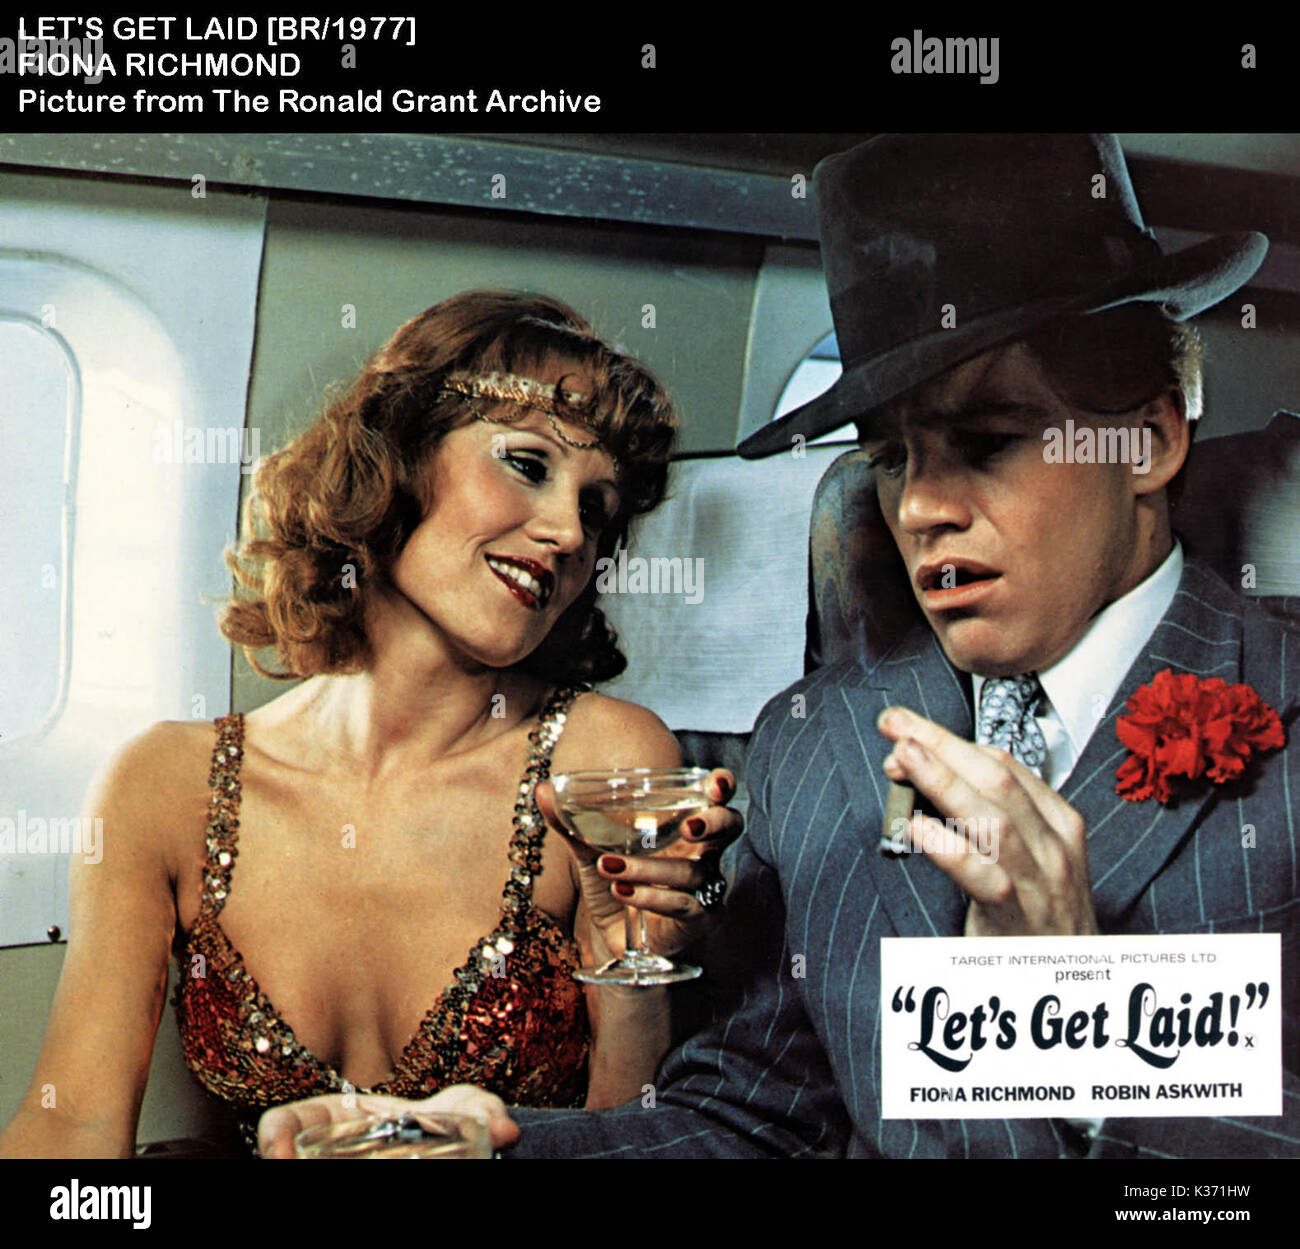 LET'S GET LAID [BR 1977]  FIONA RICHMOND     Date: 1977 Stock Photo